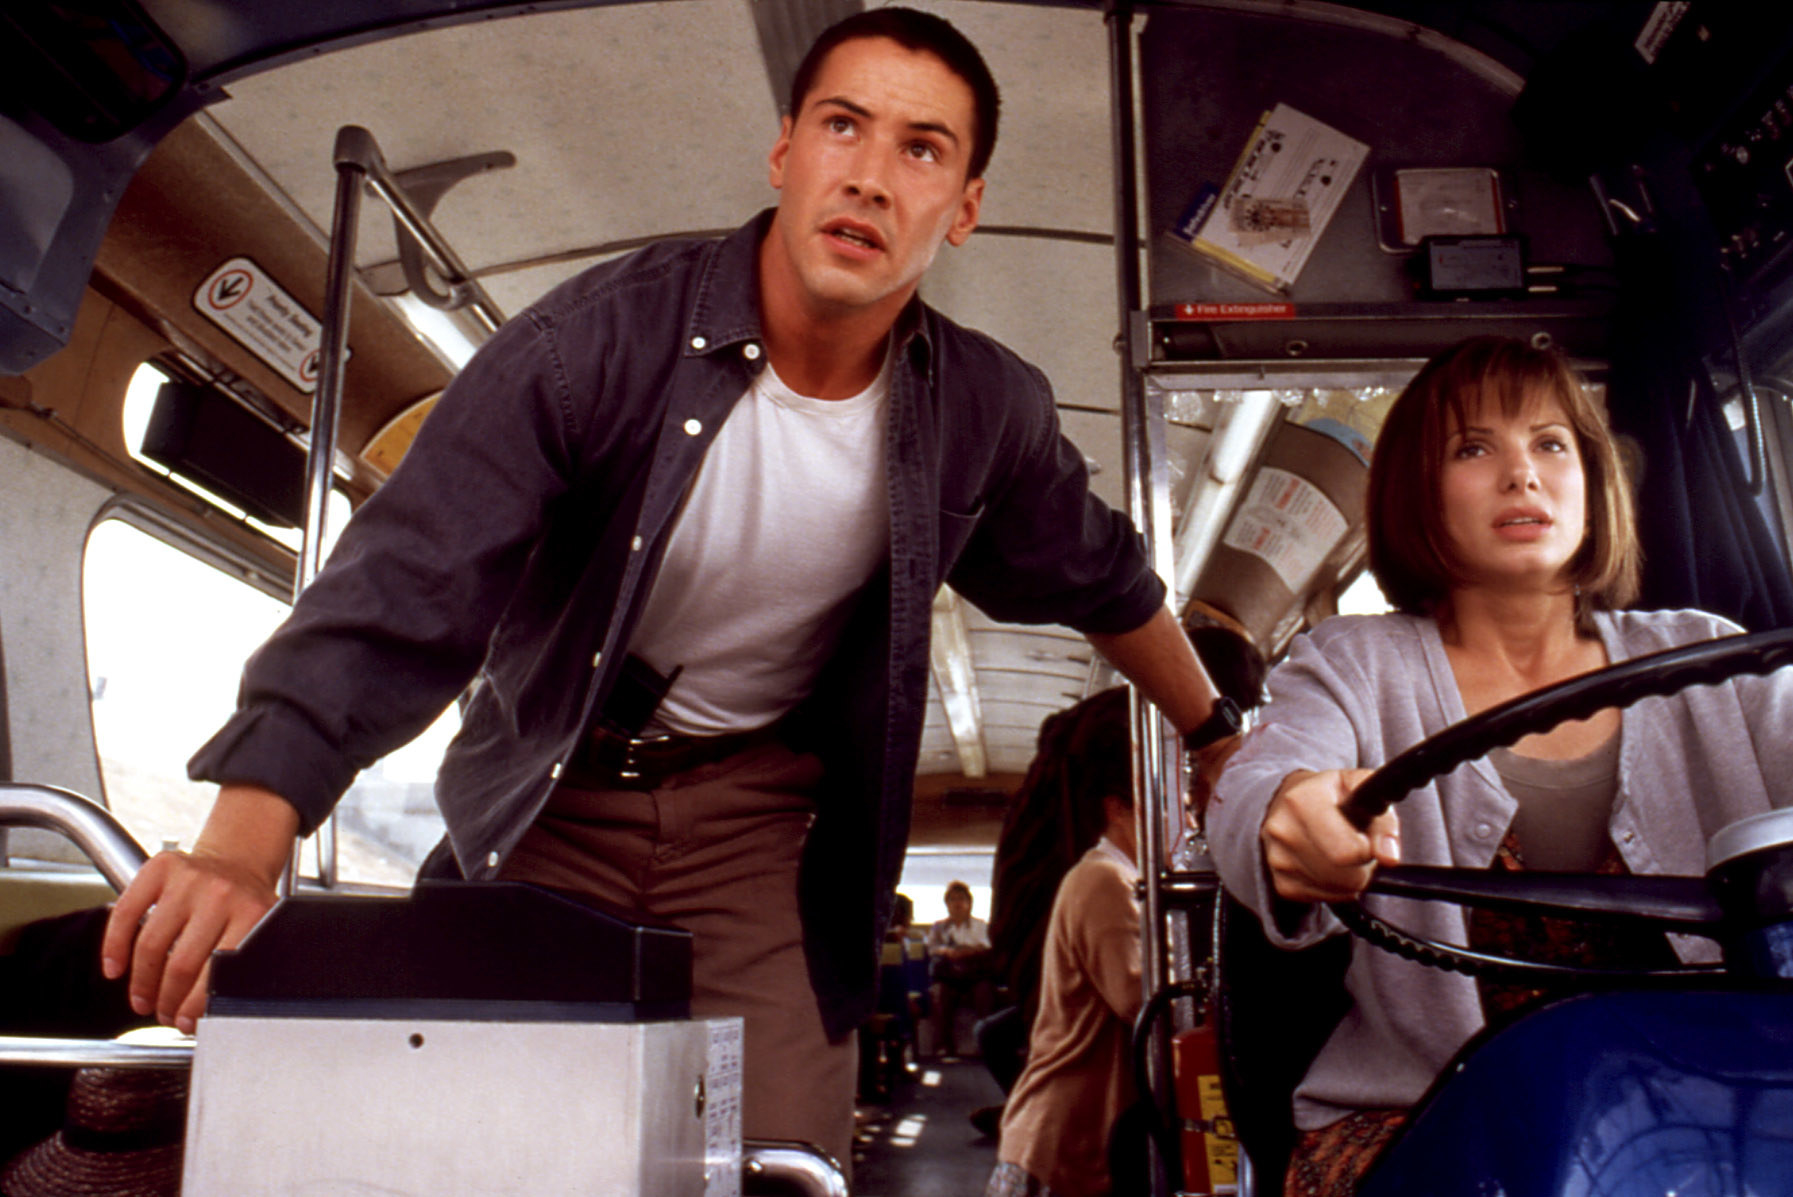 Reeves stands over Bullock as she drives the bus at high speed